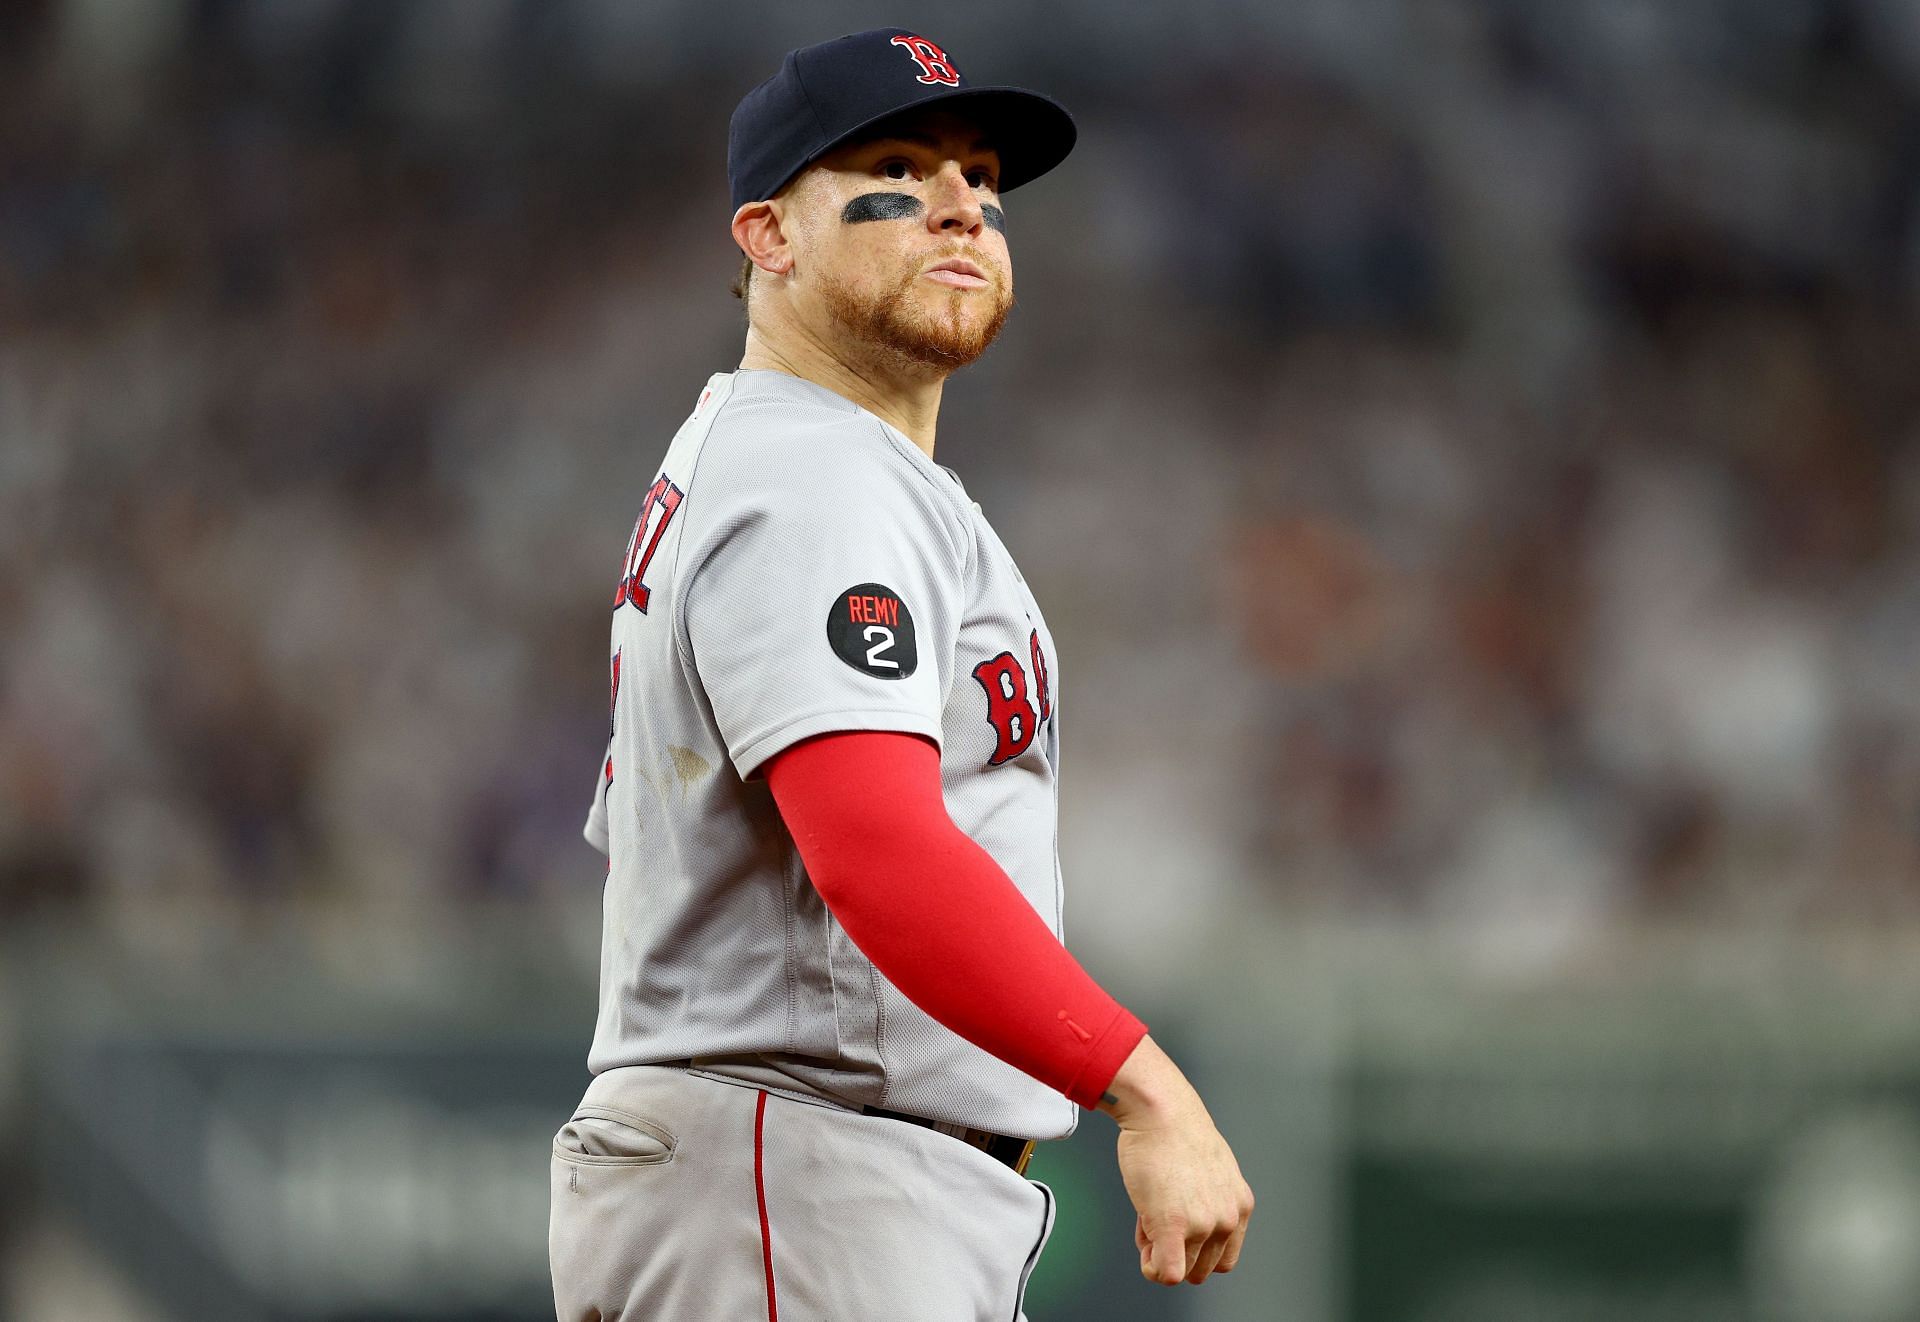 It's a business - Boston Red Sox trade Christian Vazquez to Houston Astros  while he prepares to play against them, catcher gets pulled away from  reporters by team official